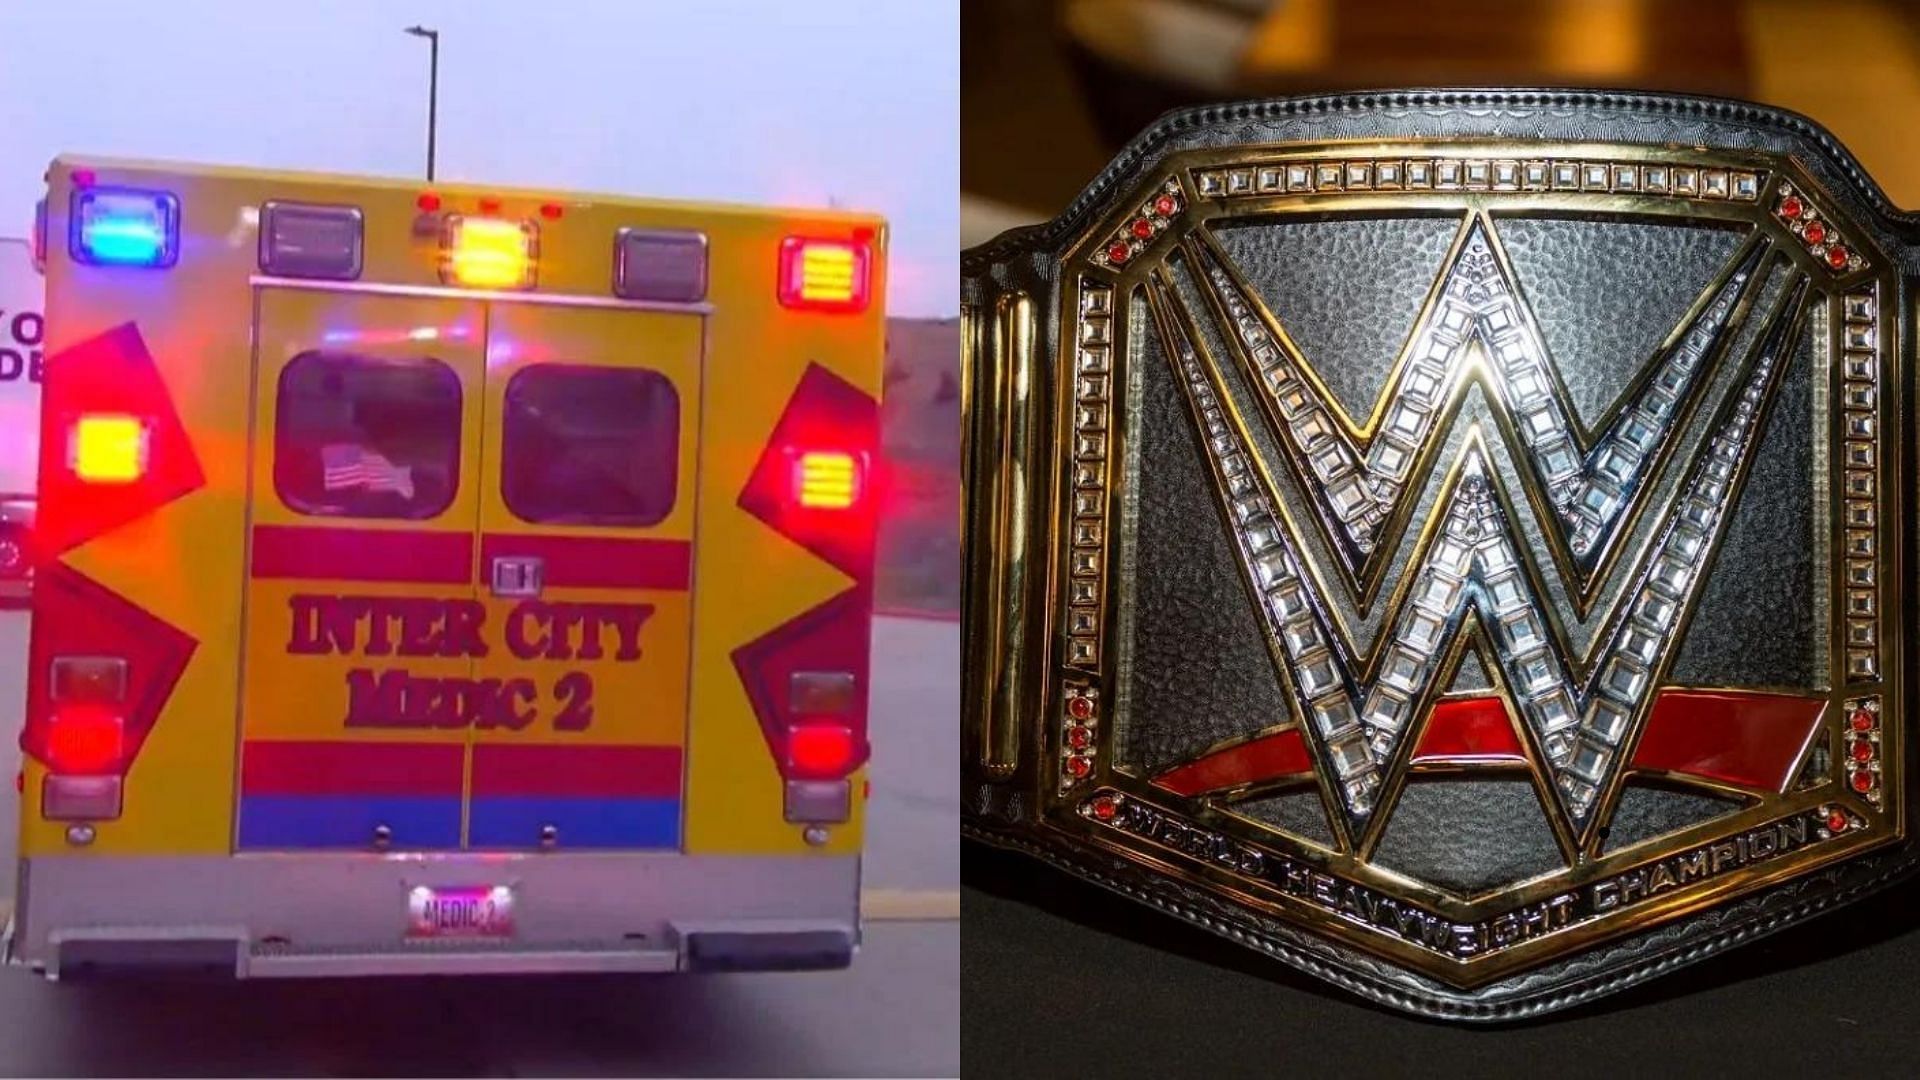 A former WWE Superstar was taken to local medical facility to check for internal injuries